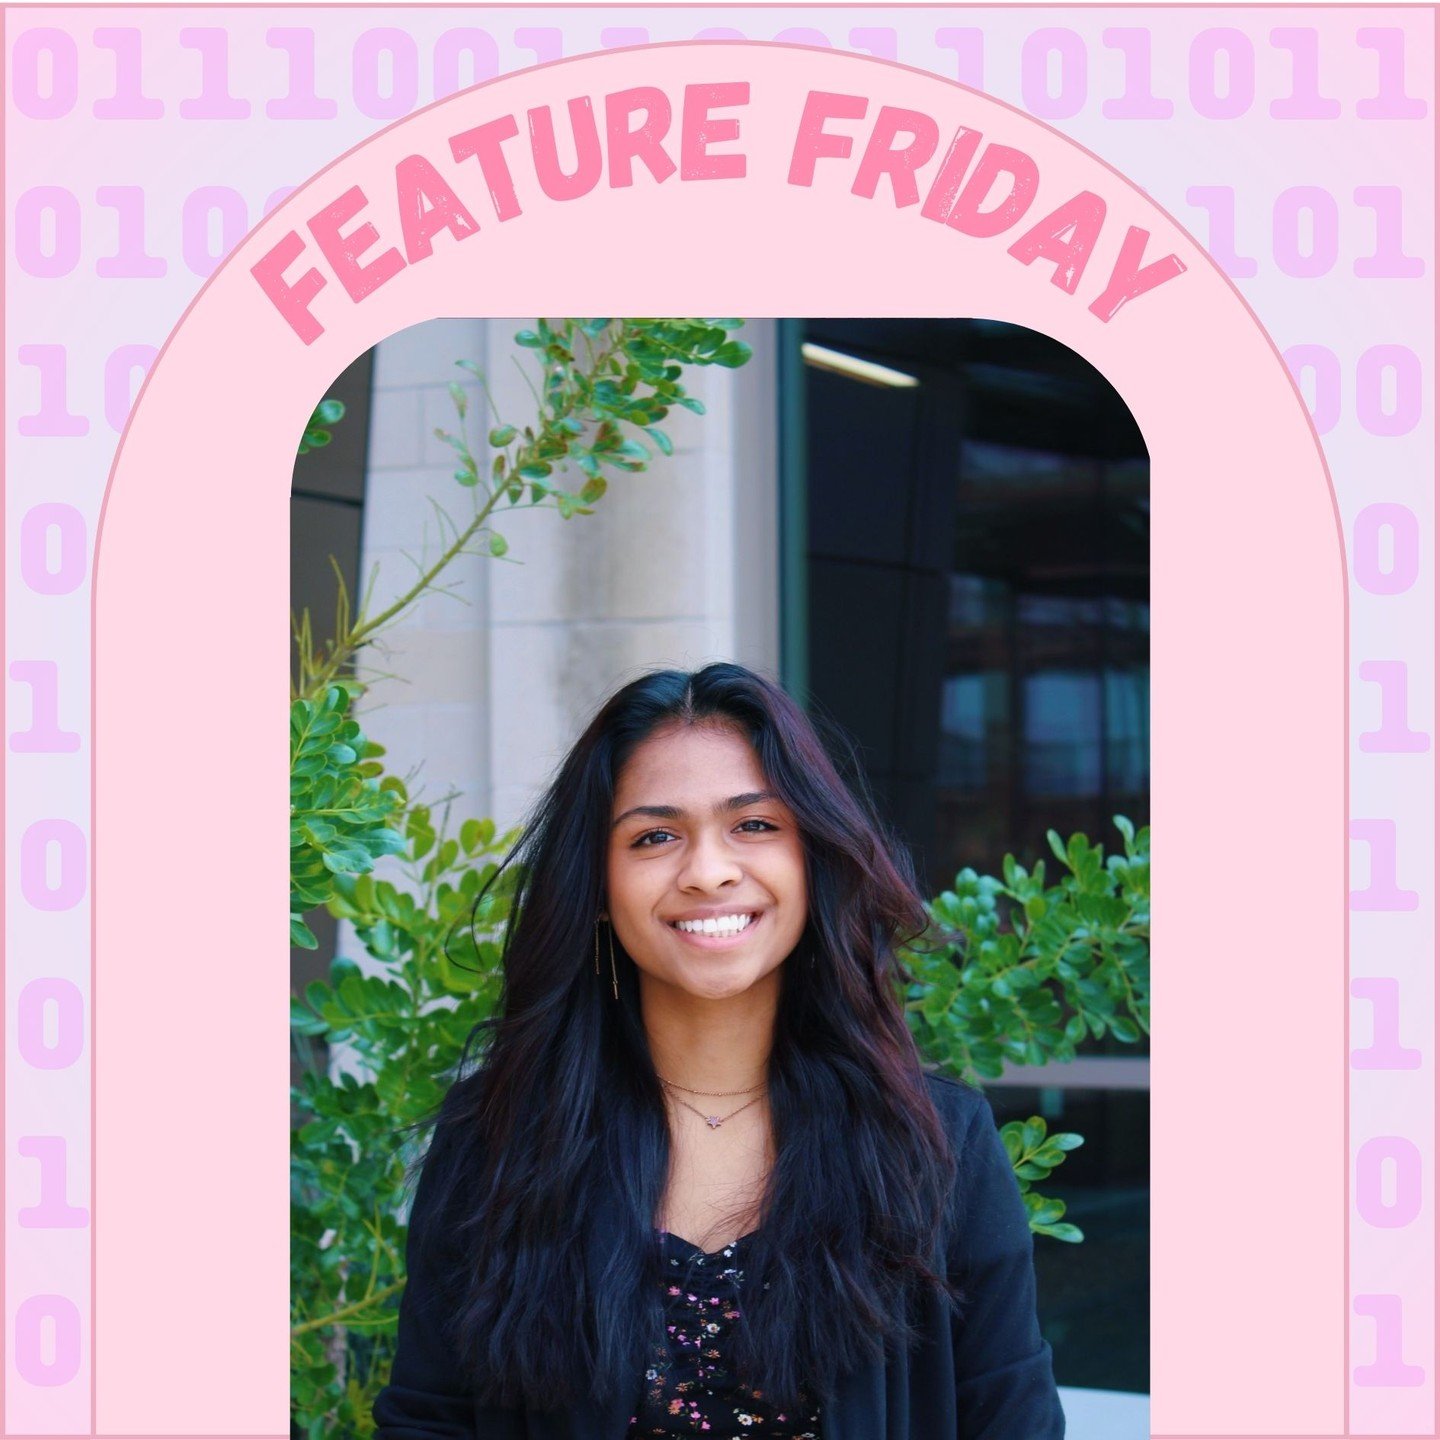 ✨FEATURE FRIDAY✨

Today&rsquo;s Feature Friday is Pavithra Gopalakrishnan!! Pavithra is in her sophomore year as a computer science major. She has been in AWICS for 2 years and currently serves as one of our Marketing Officers. Over the summer, Pavit